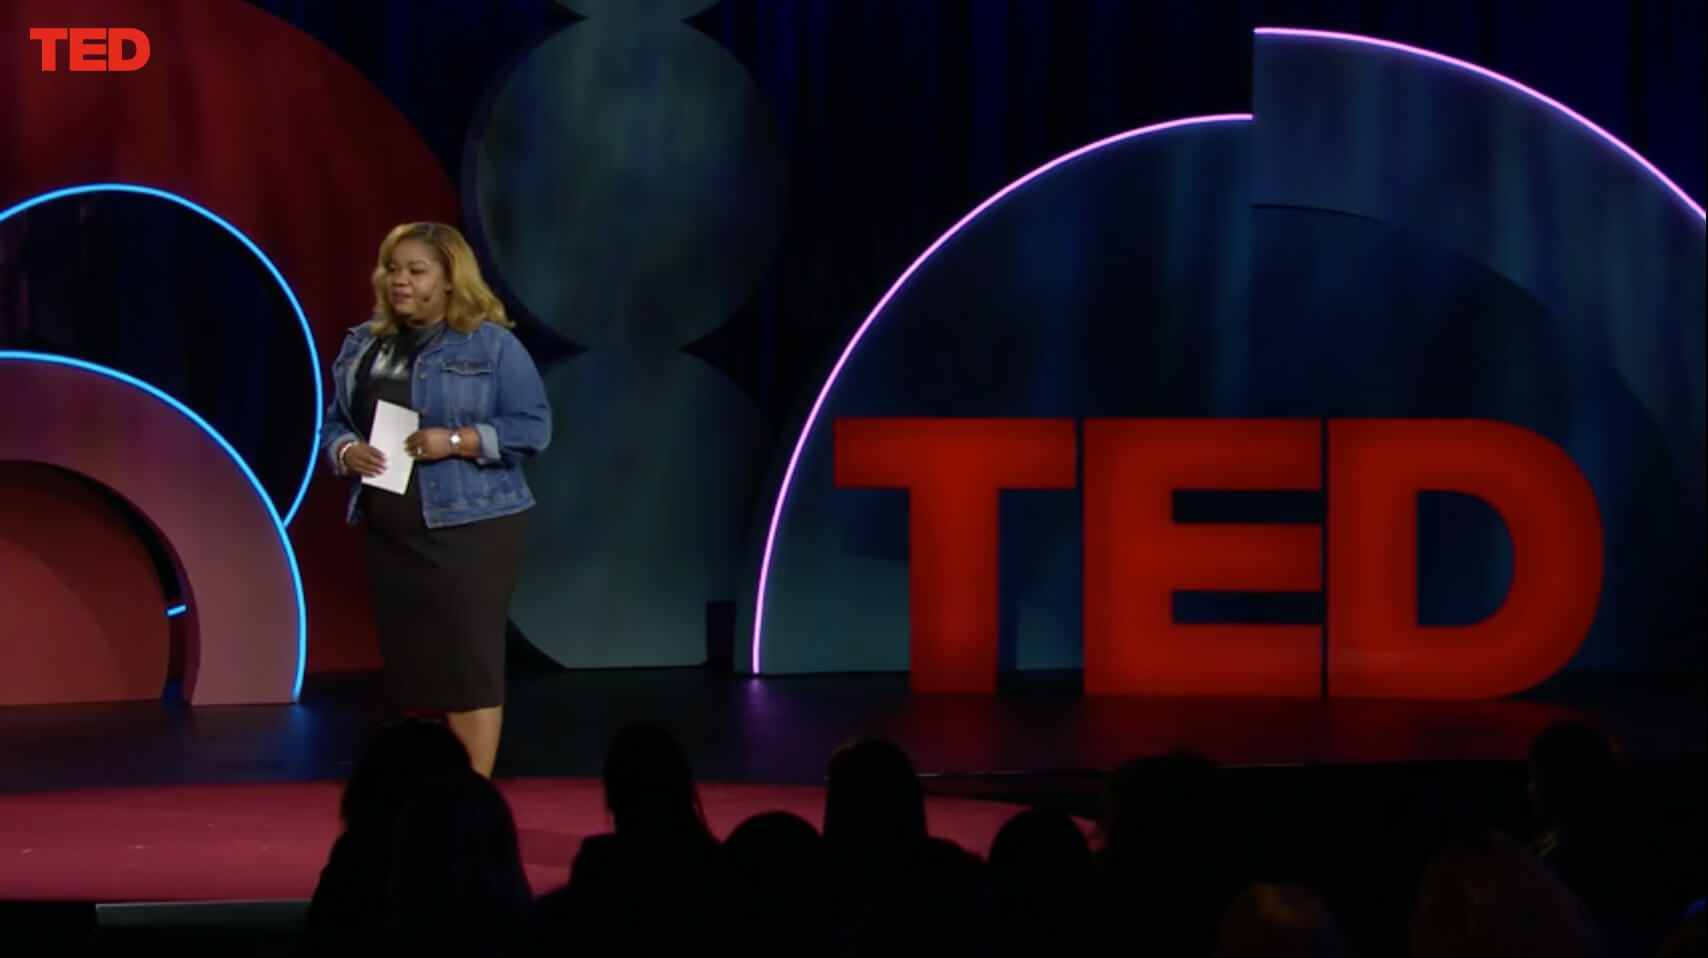 Danielle speaking at the TED Talk